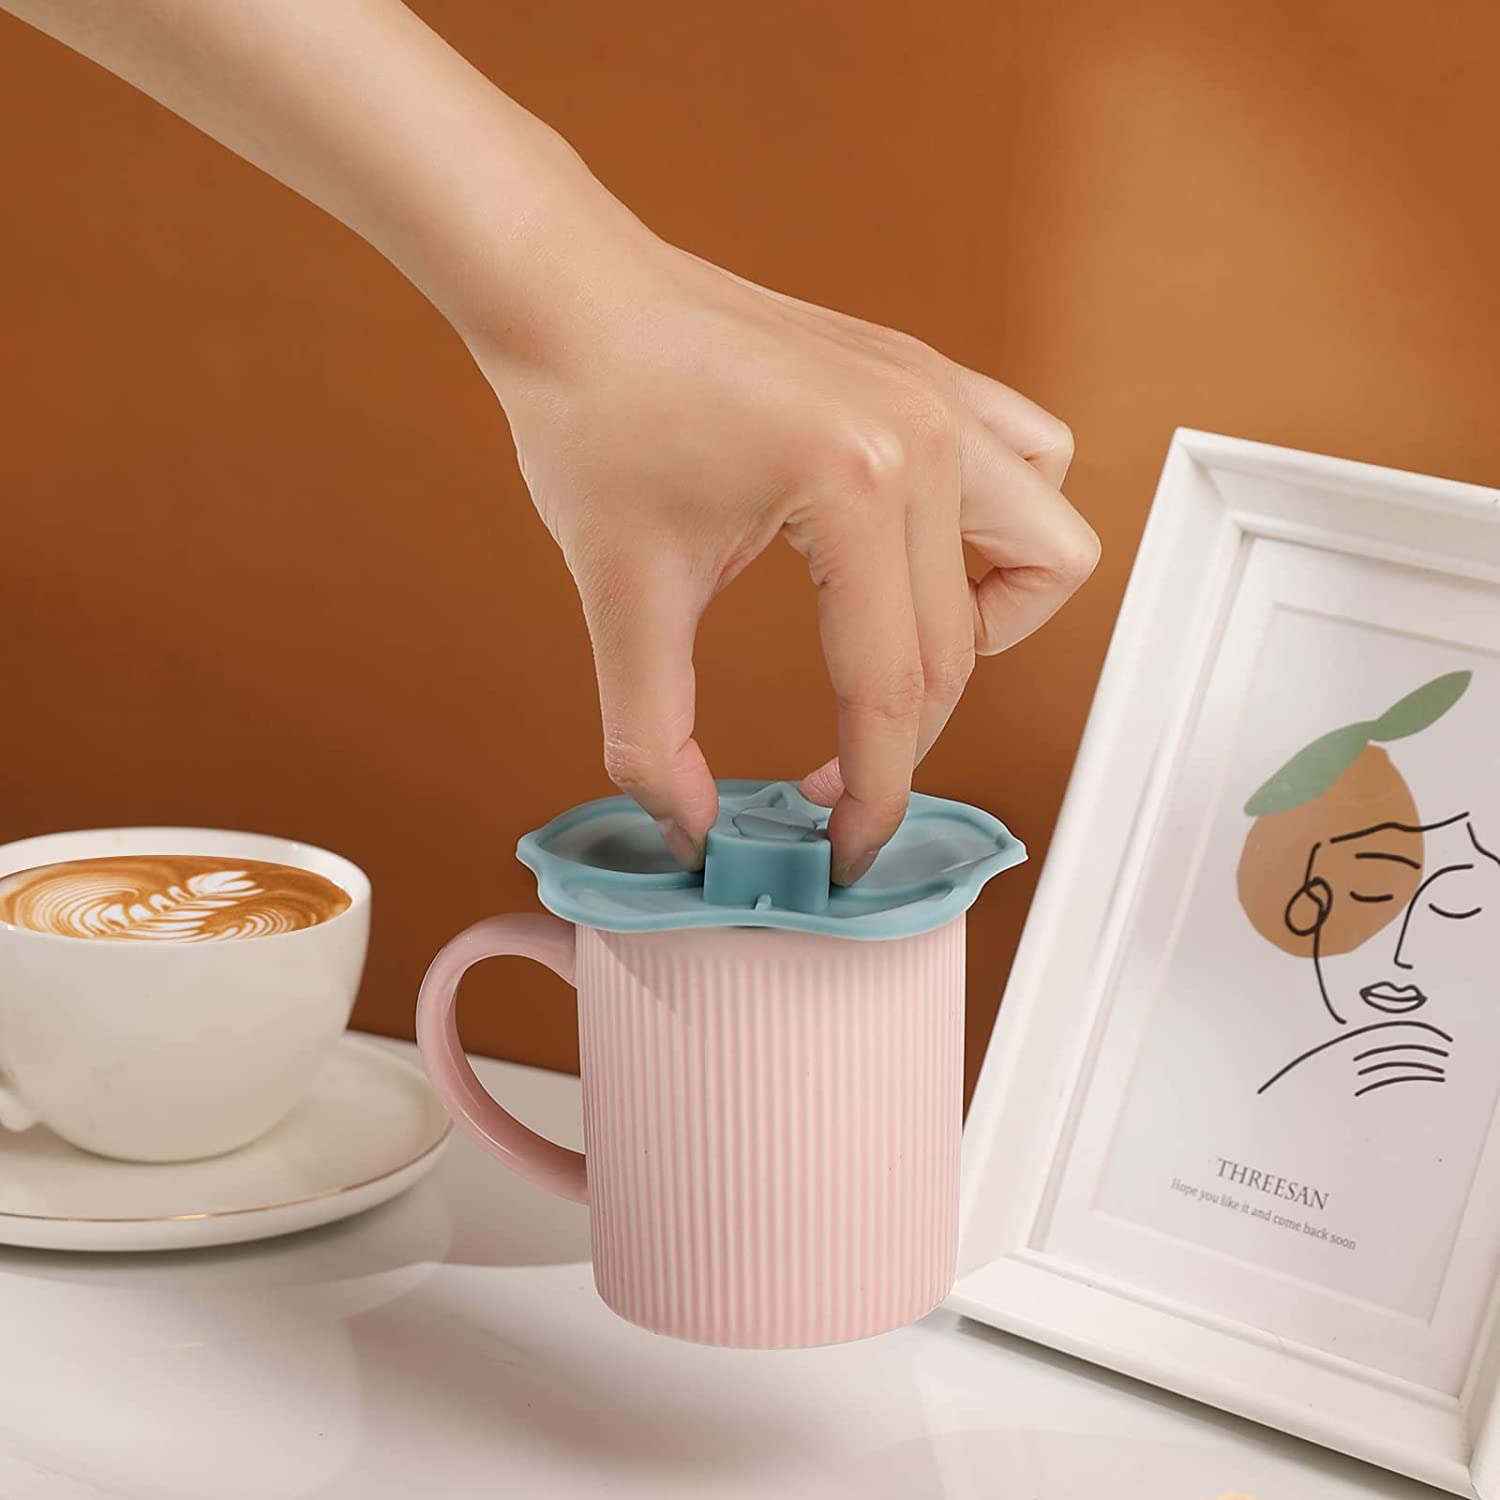 silicone Cup Lid] 3pcs Creative Cup Lid For Mug, Teacup, Glass Cup